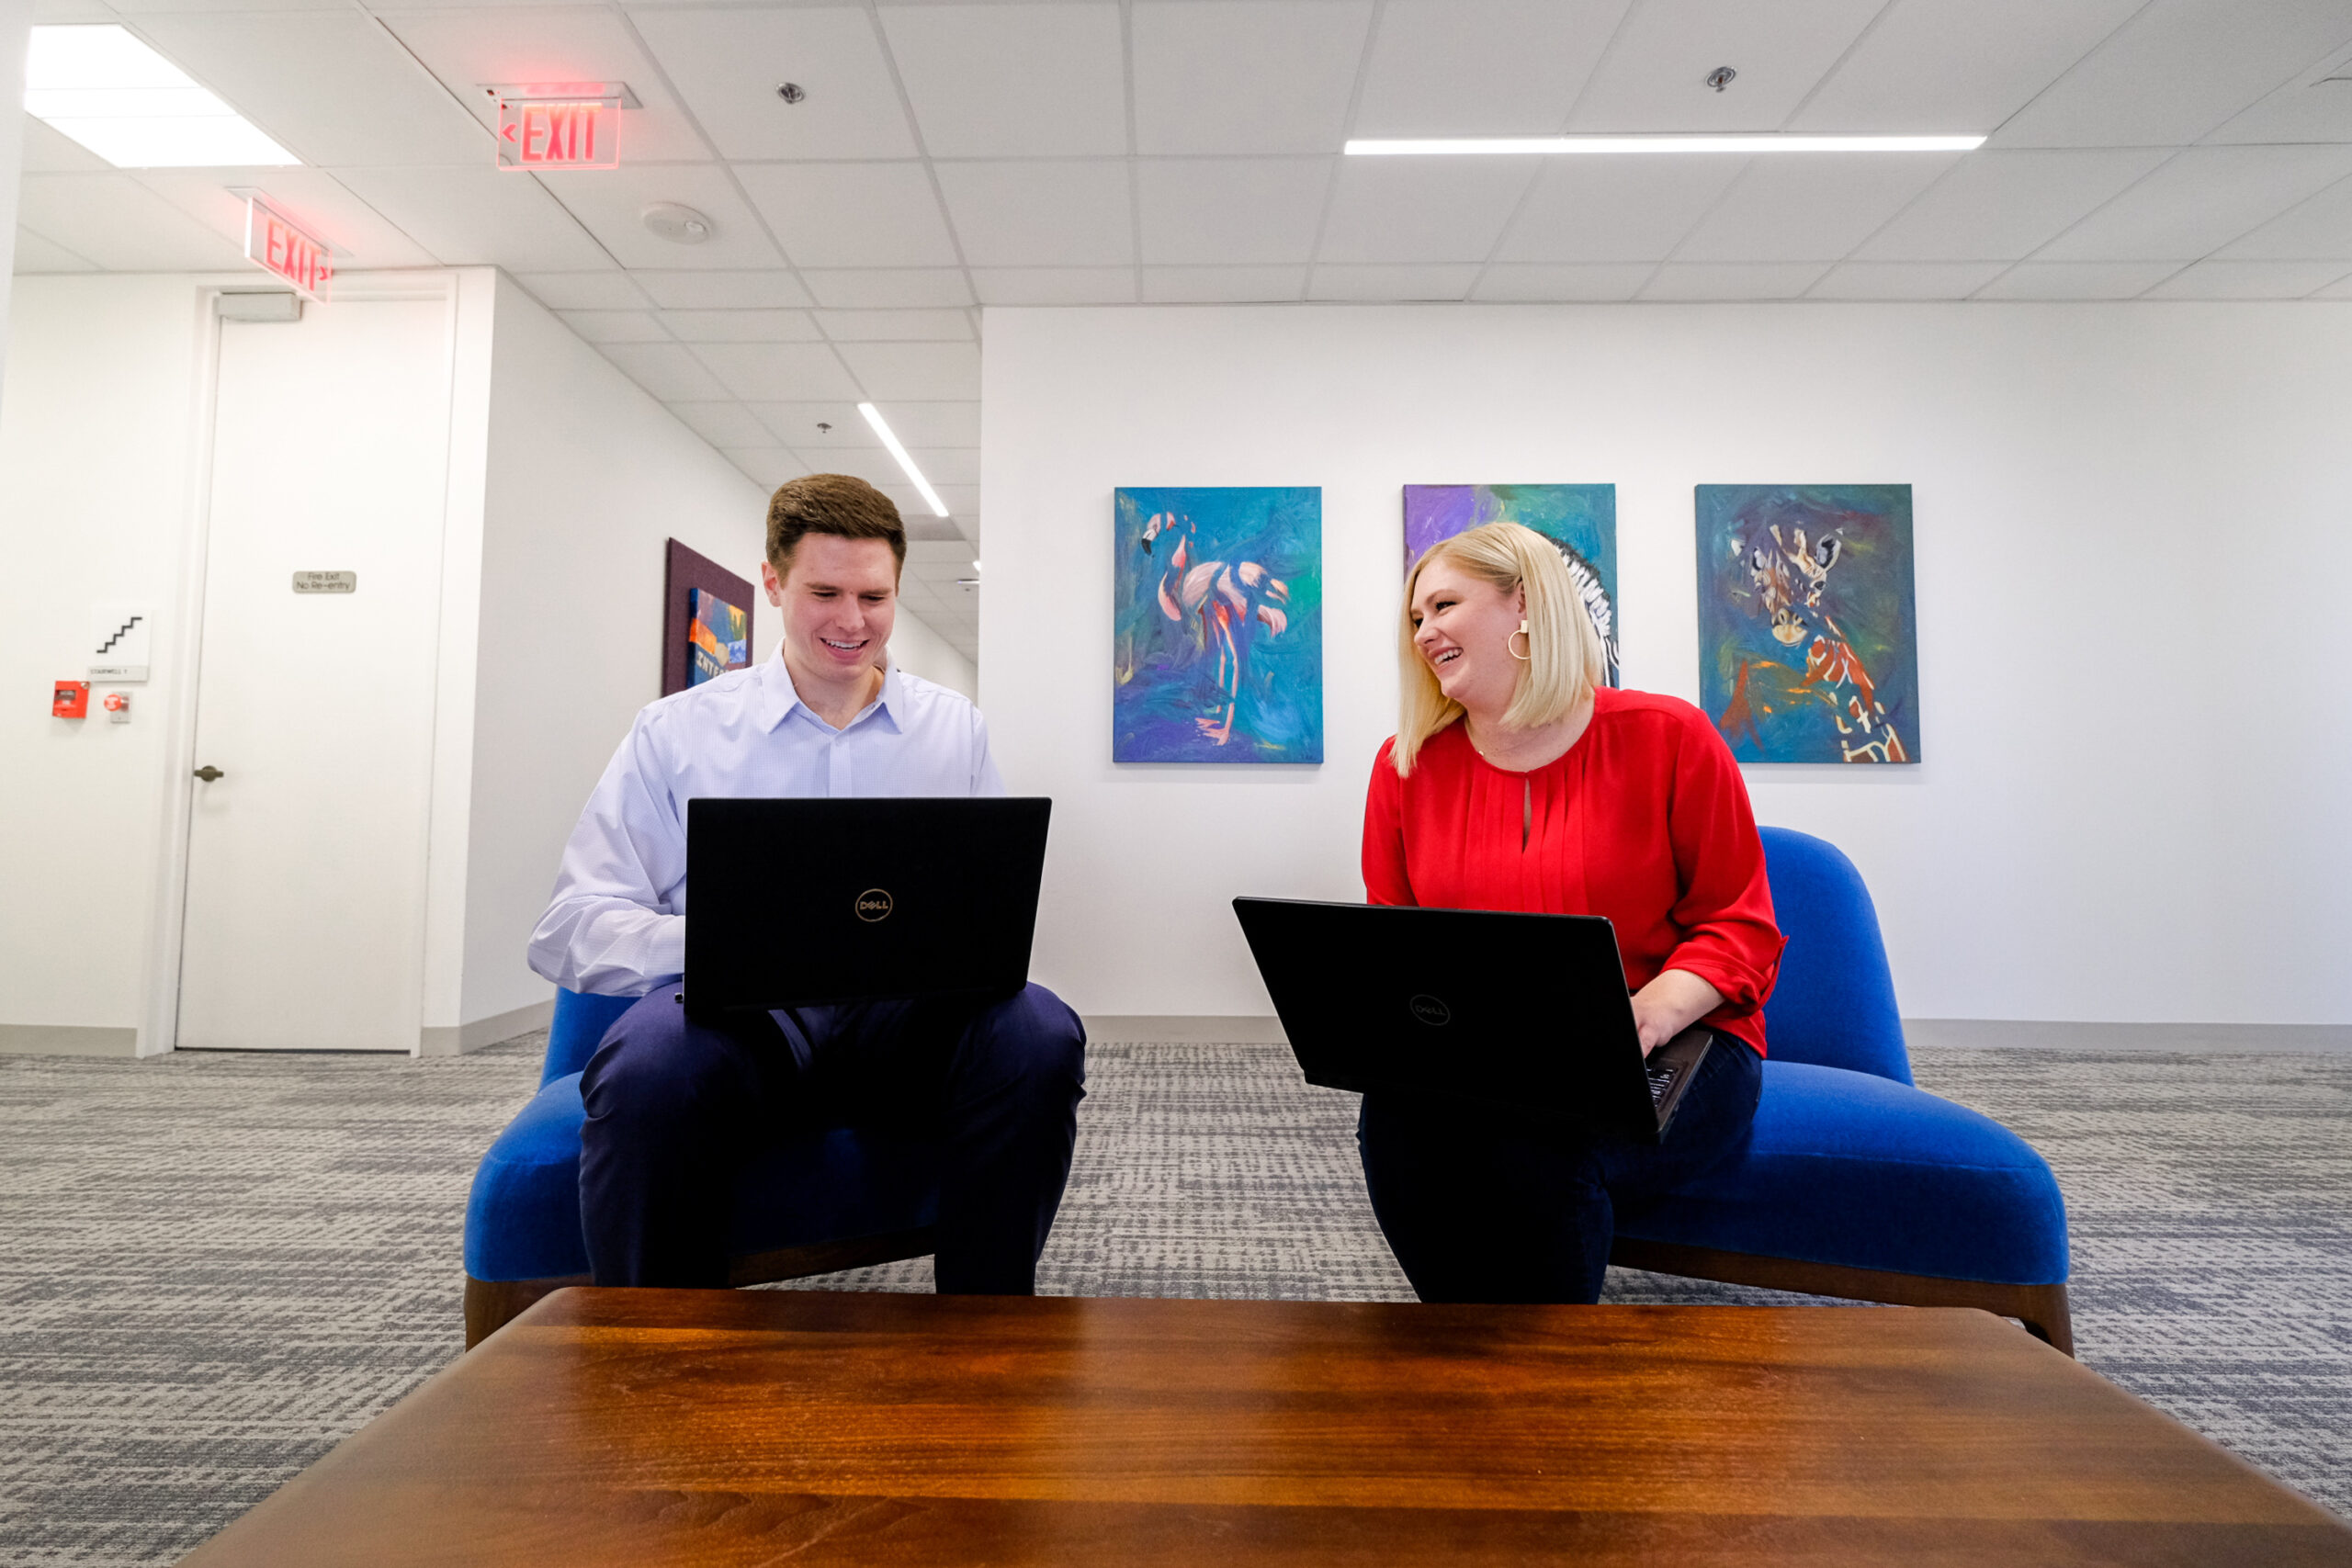 A Caucasian male and Caucasian female sitting in office chairs on laptops